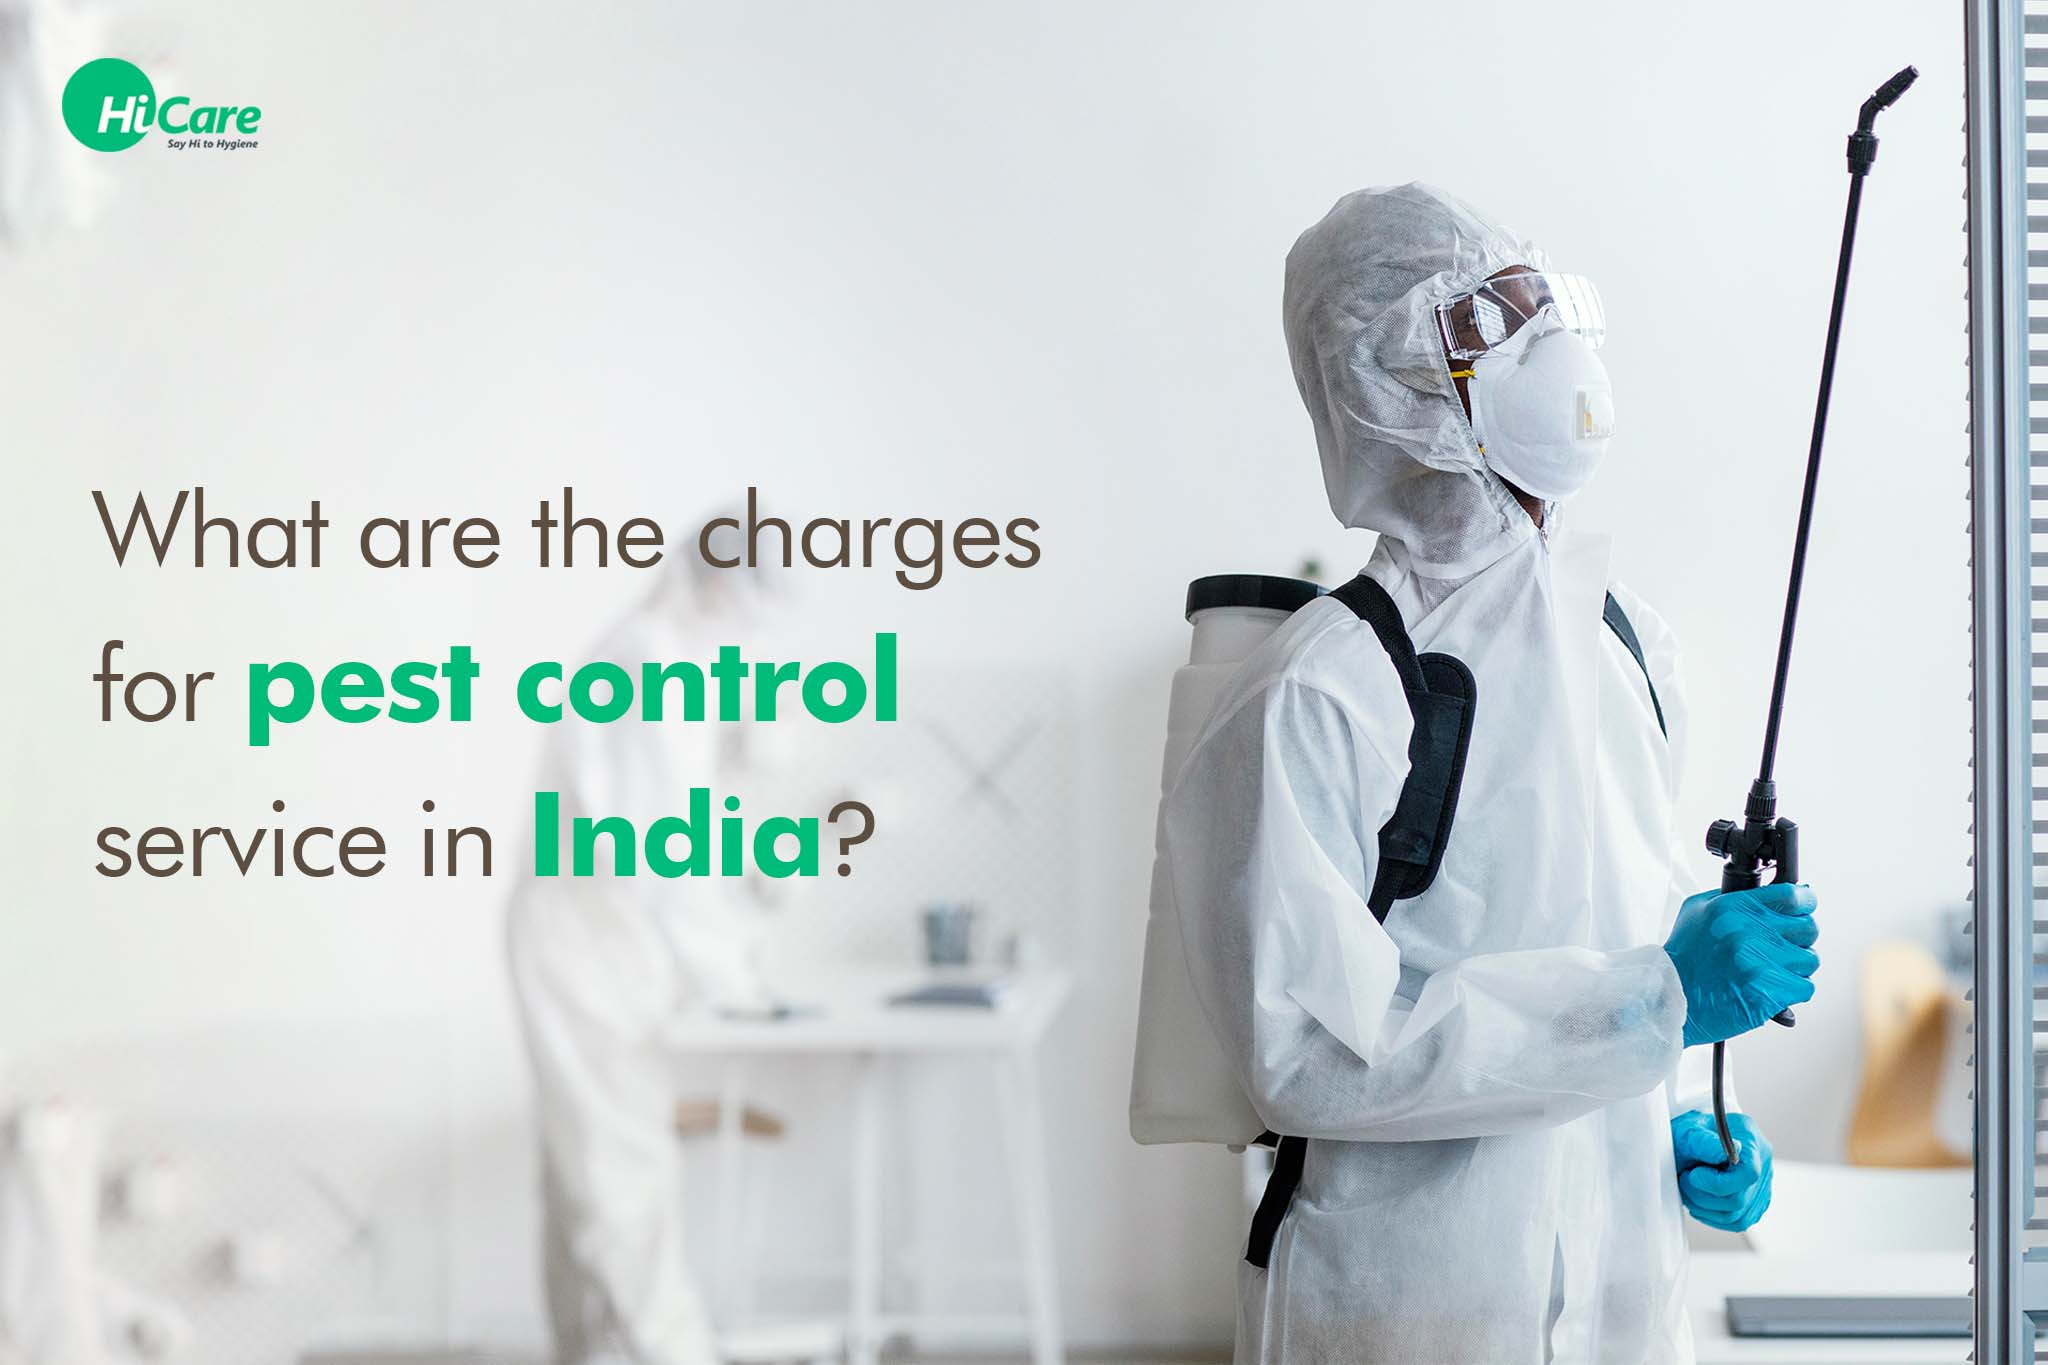 Prices of Different Pest Control Services in India | HiCare